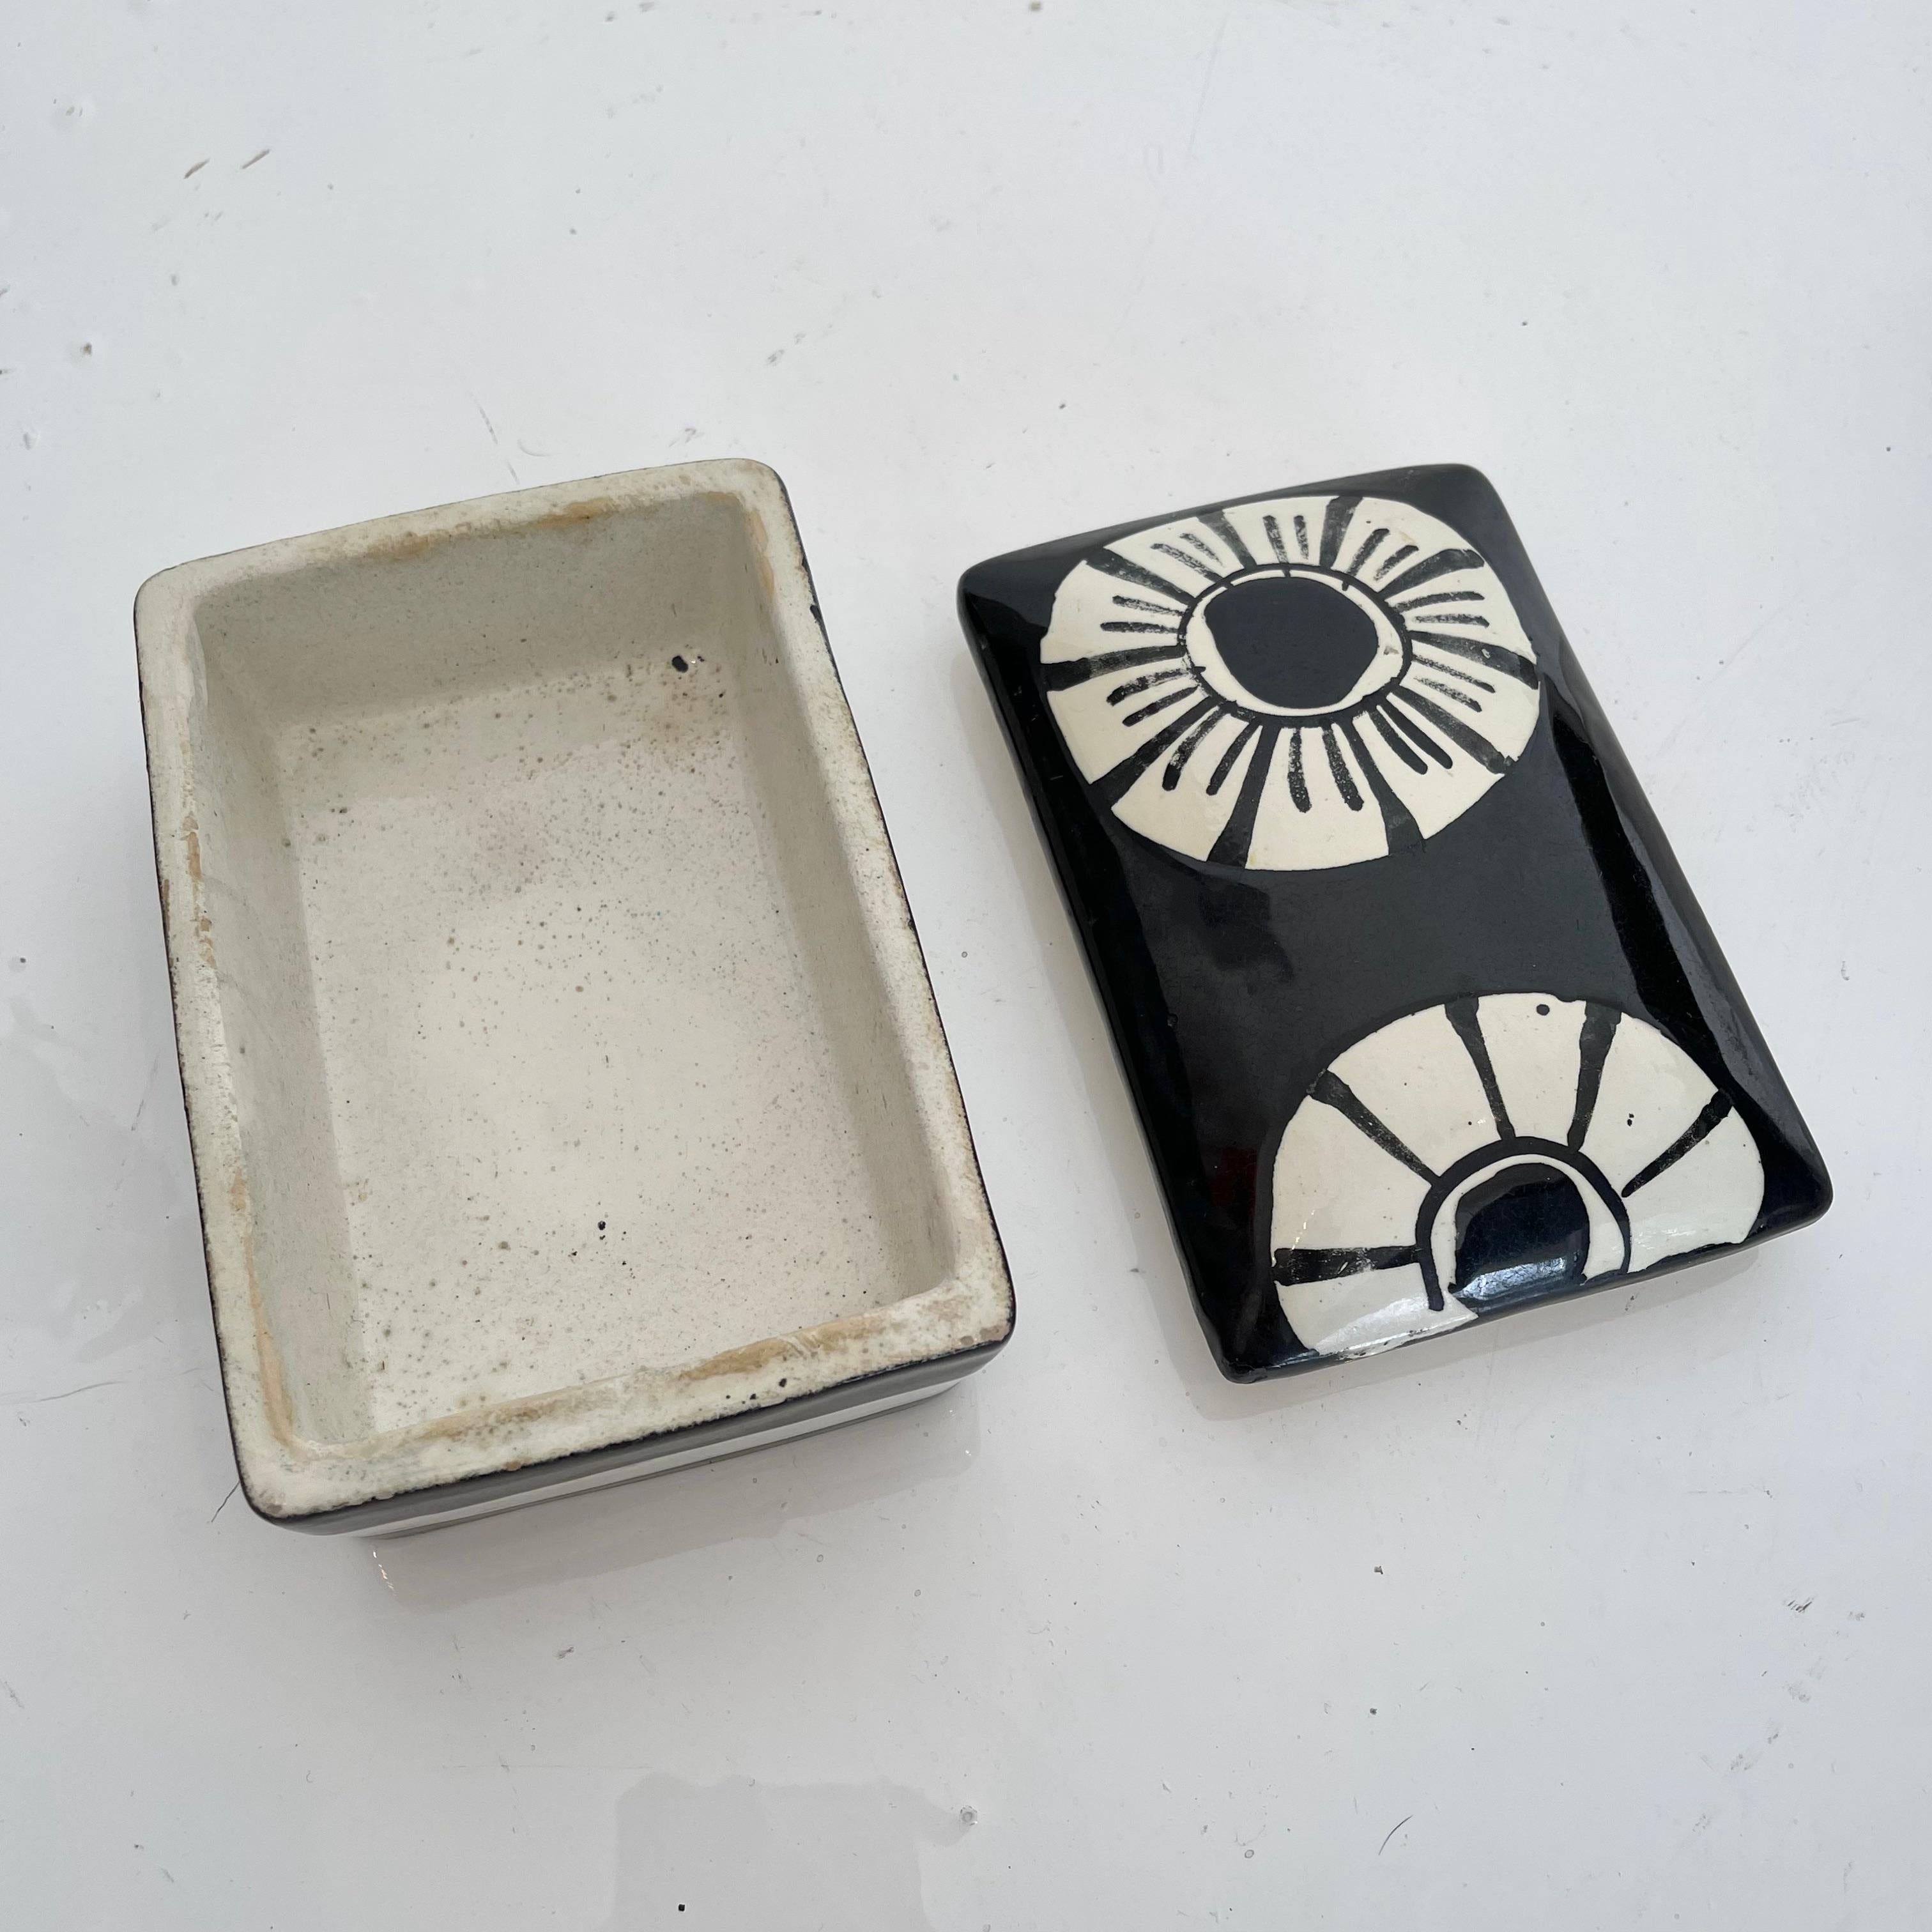 Elegant ceramic box made in Italy, circa 1970s. Black and white color theme with white flowers. Great condition. Perfect stash box or tabletop object. Marked Made in Italy on underside.